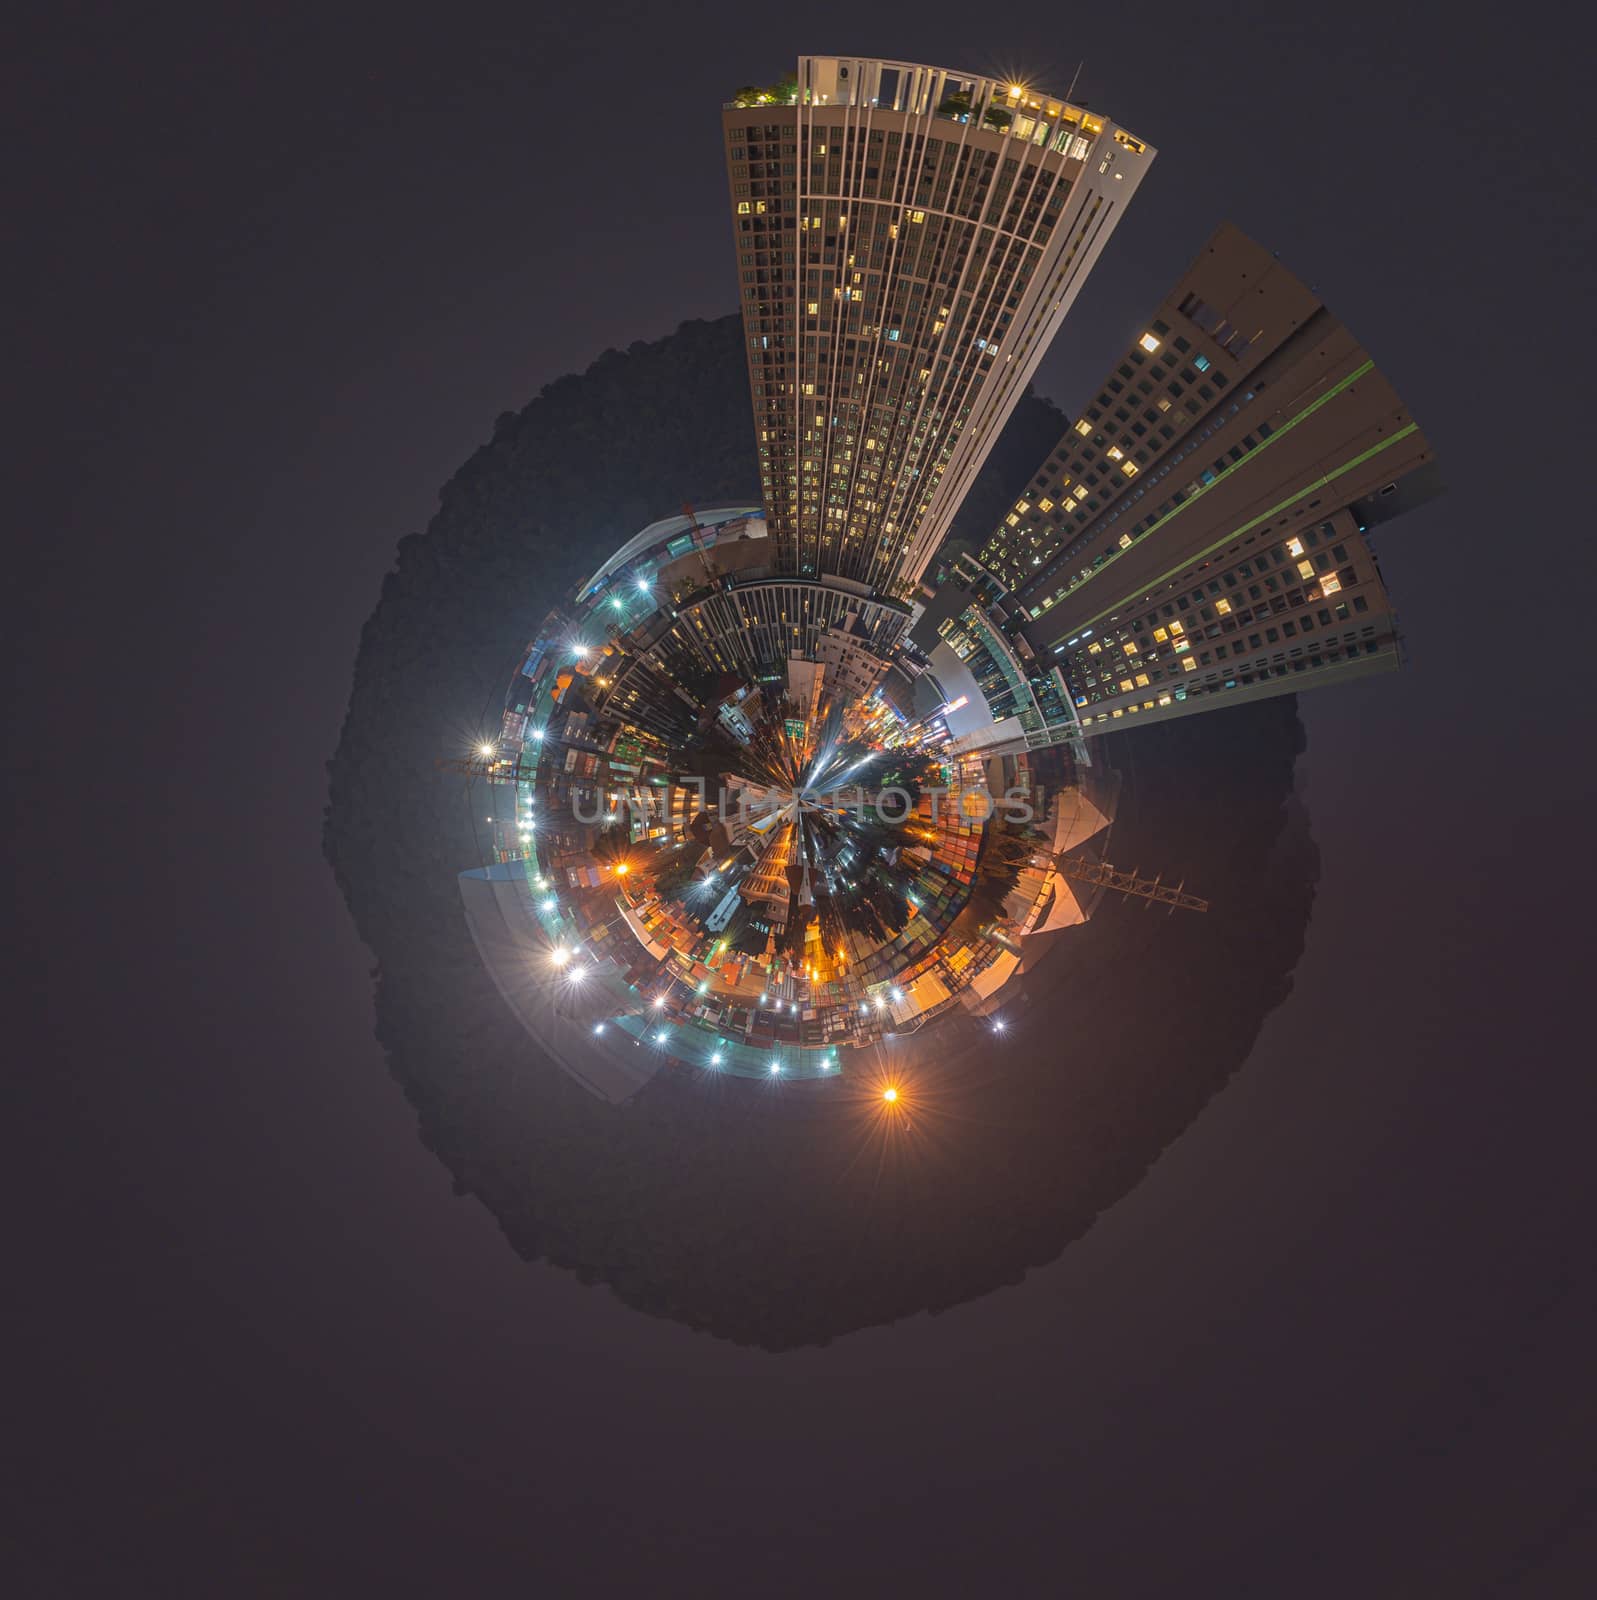 The Aerial 360 degrees Panorama of aerial view of small city concept at night